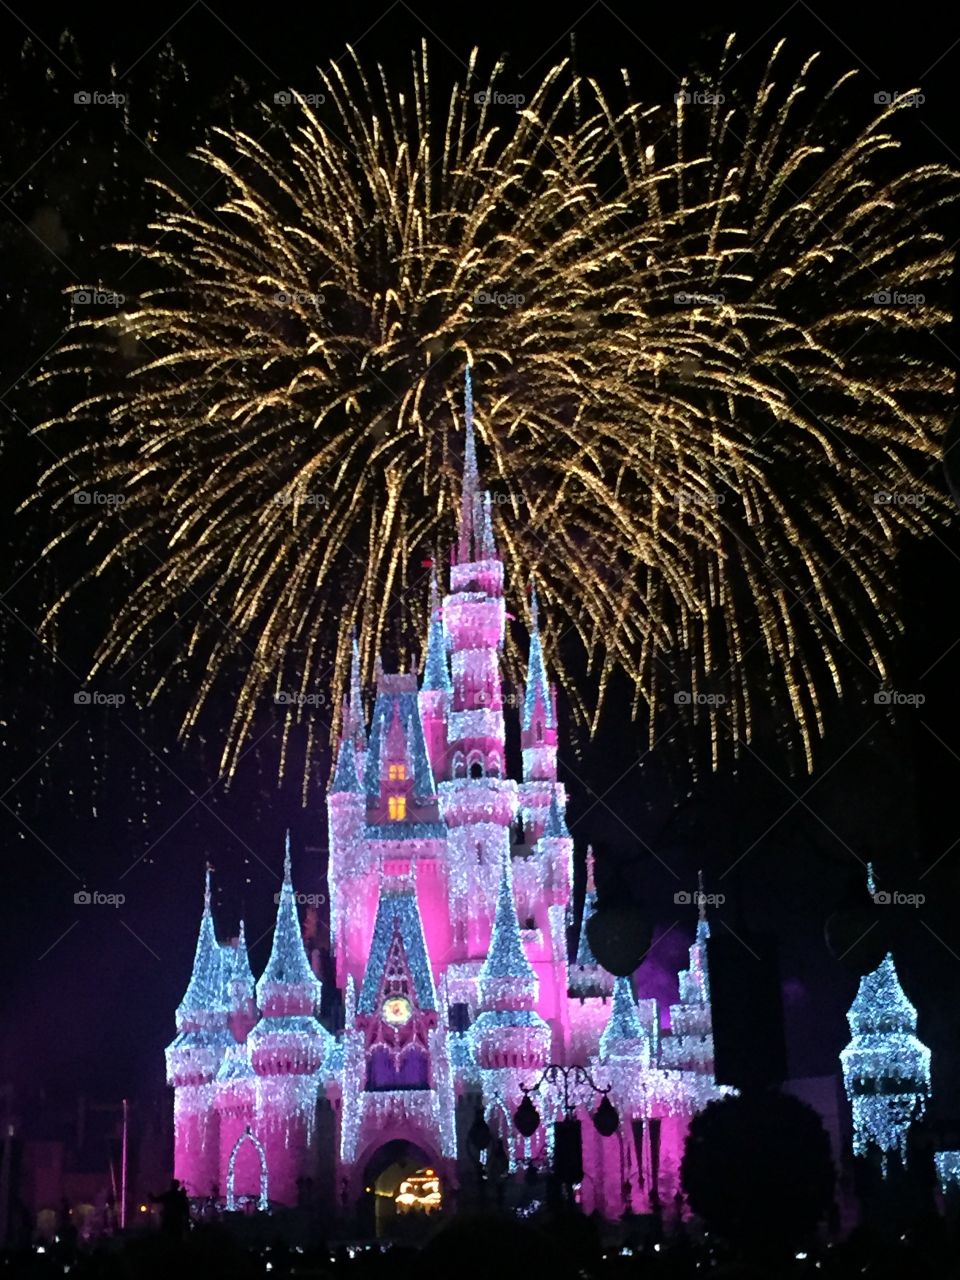 My trip to see Christmas in Disney 